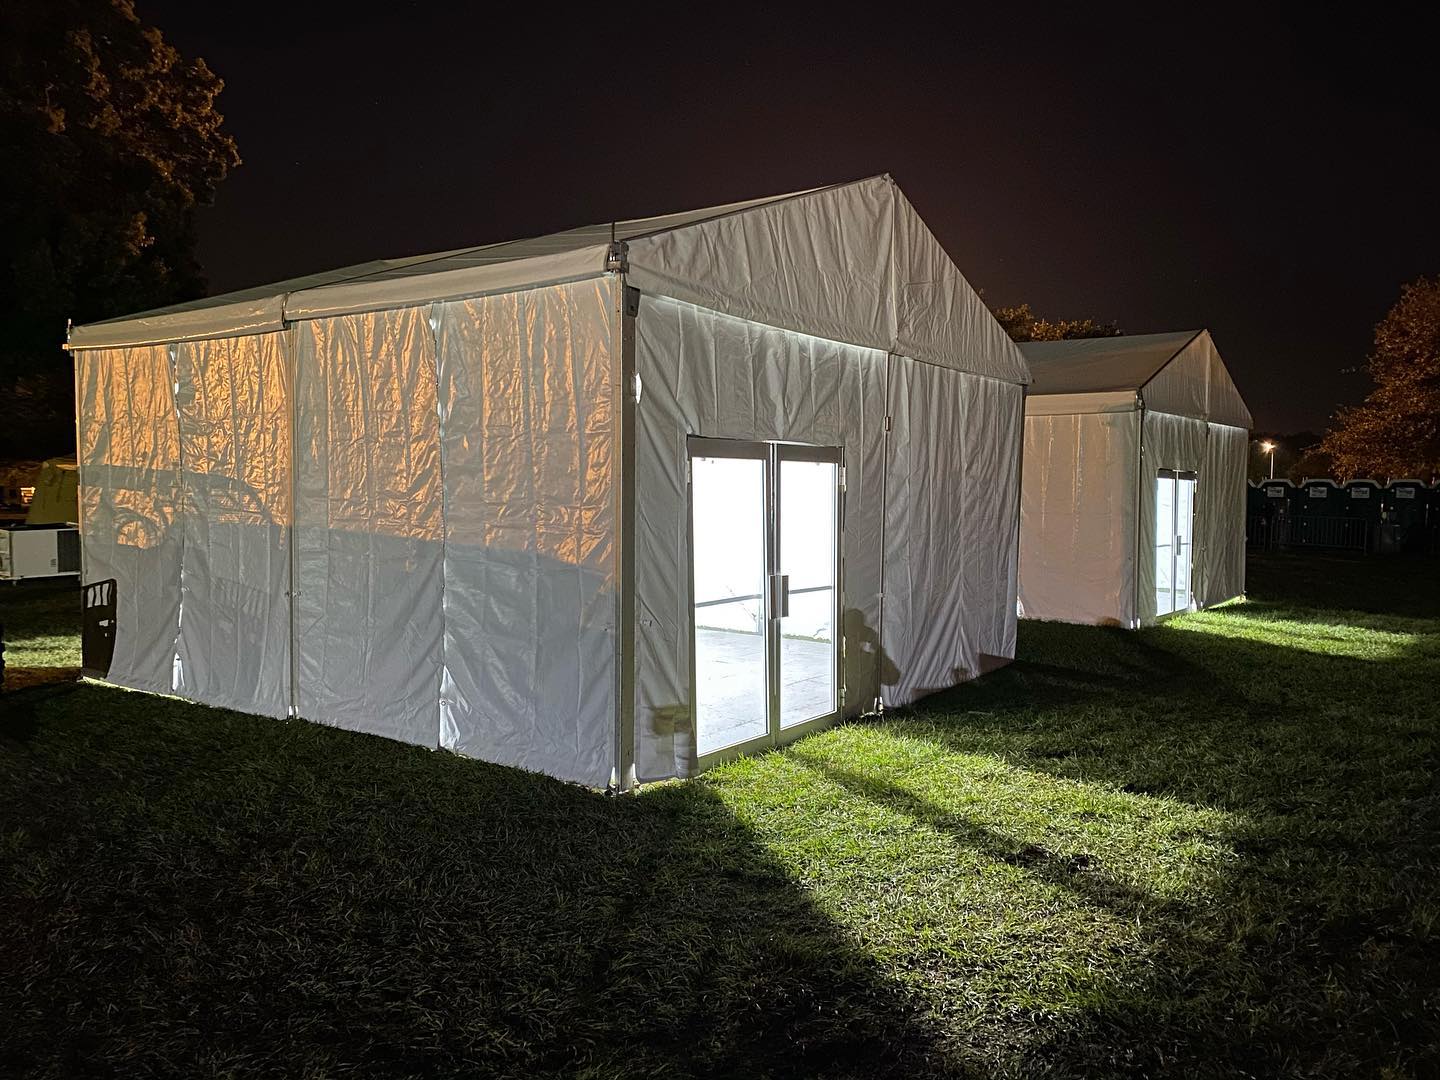 Large white tents with glass doors sit on a dark field.